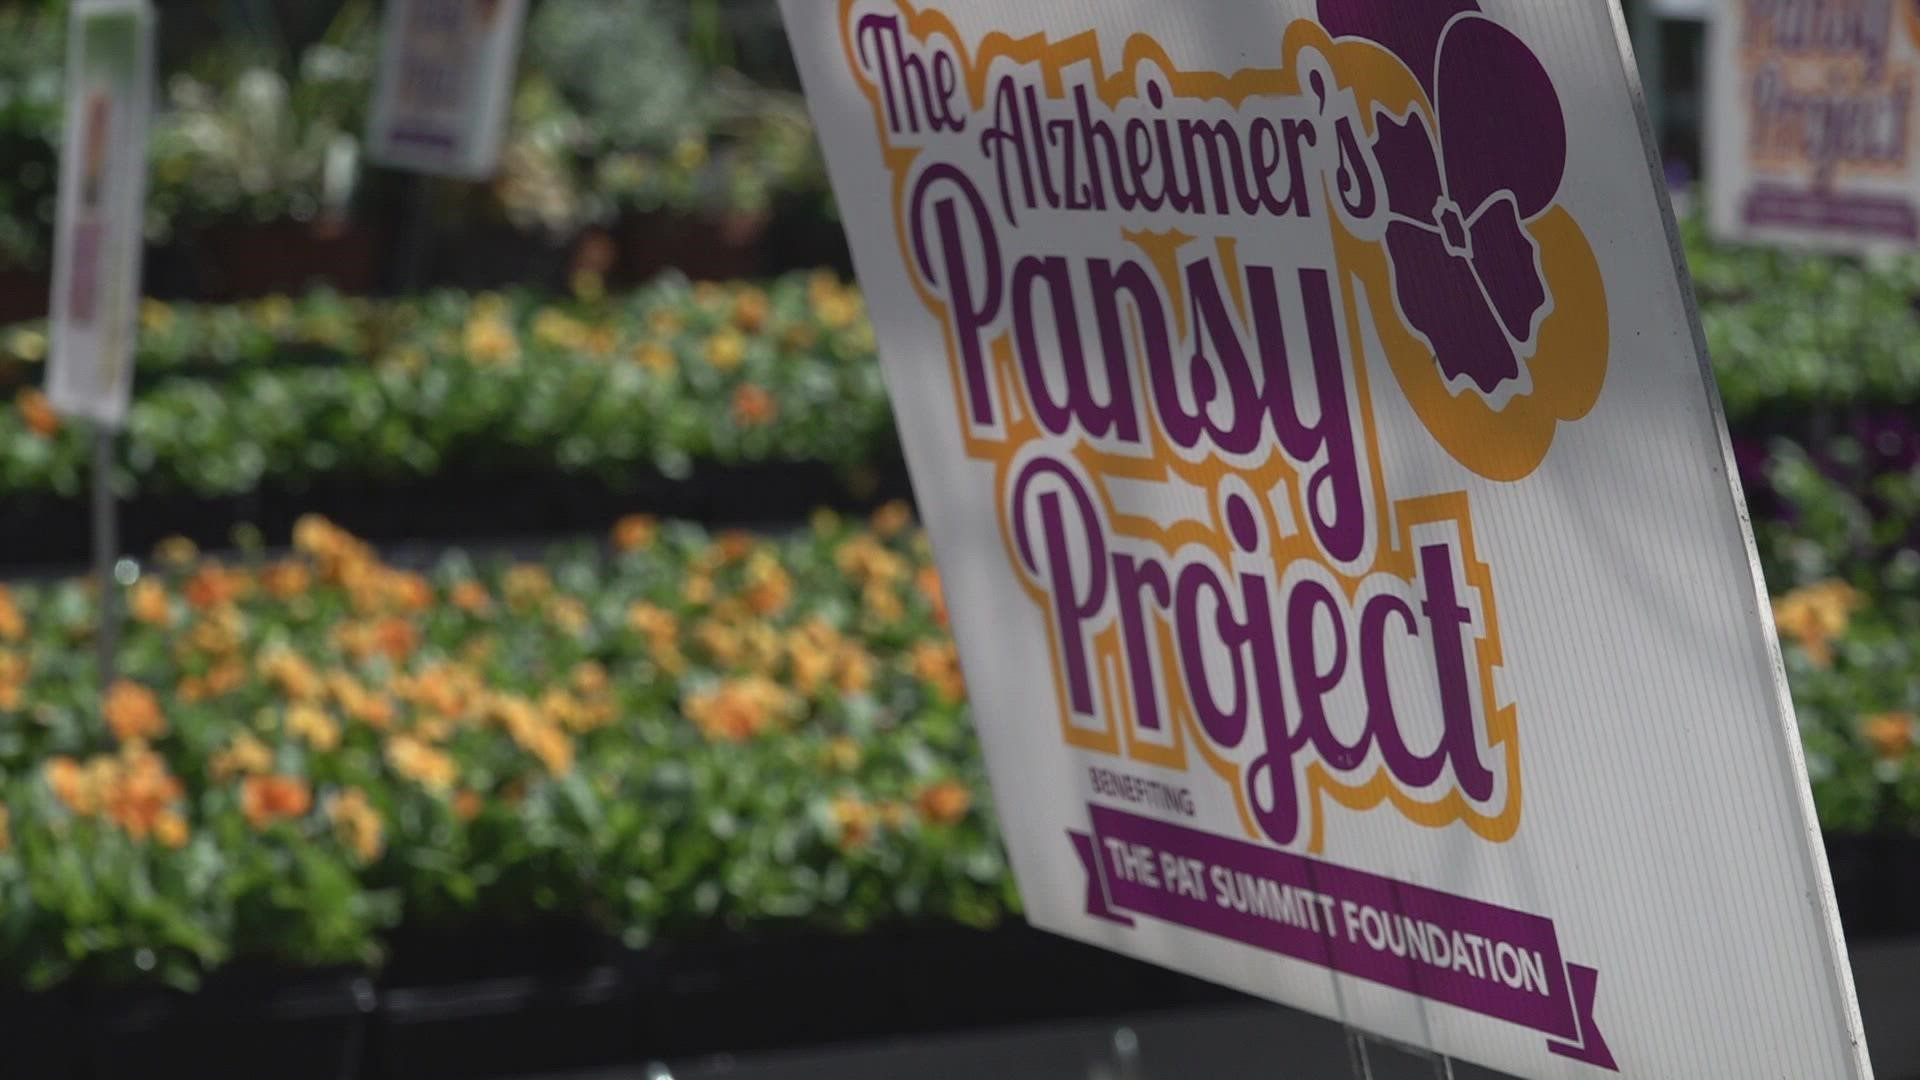 The Pansy Project kicked off on Thursday. Throughout the fall, people can by orange and purple pansies as a symbol of support for people affected by Alzheimer's.